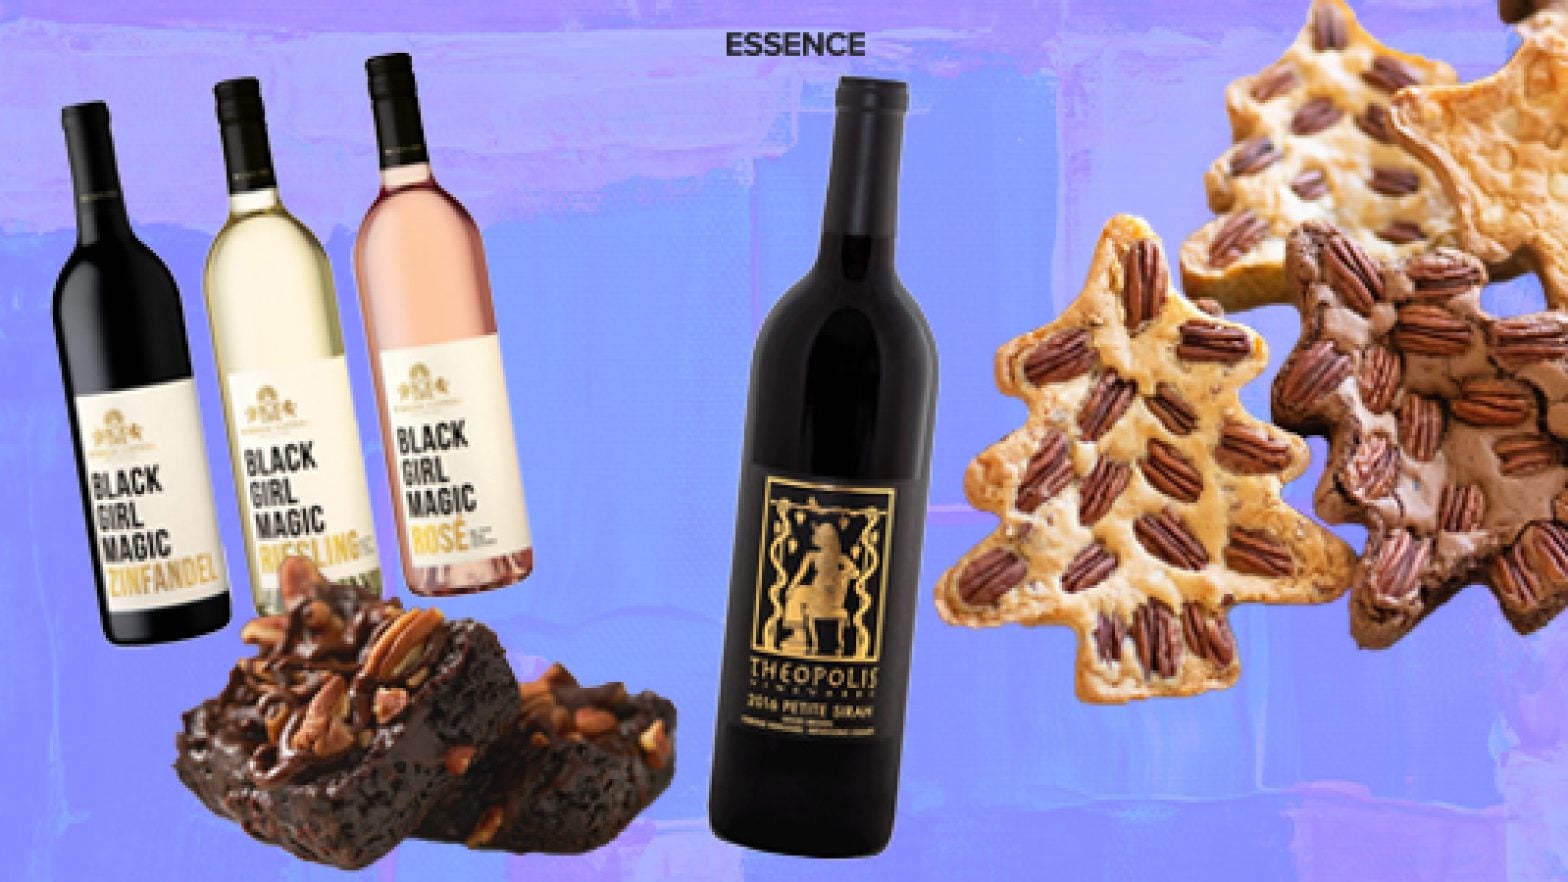 Give The Gift of Sweetness from Black Bakers and Winemakers